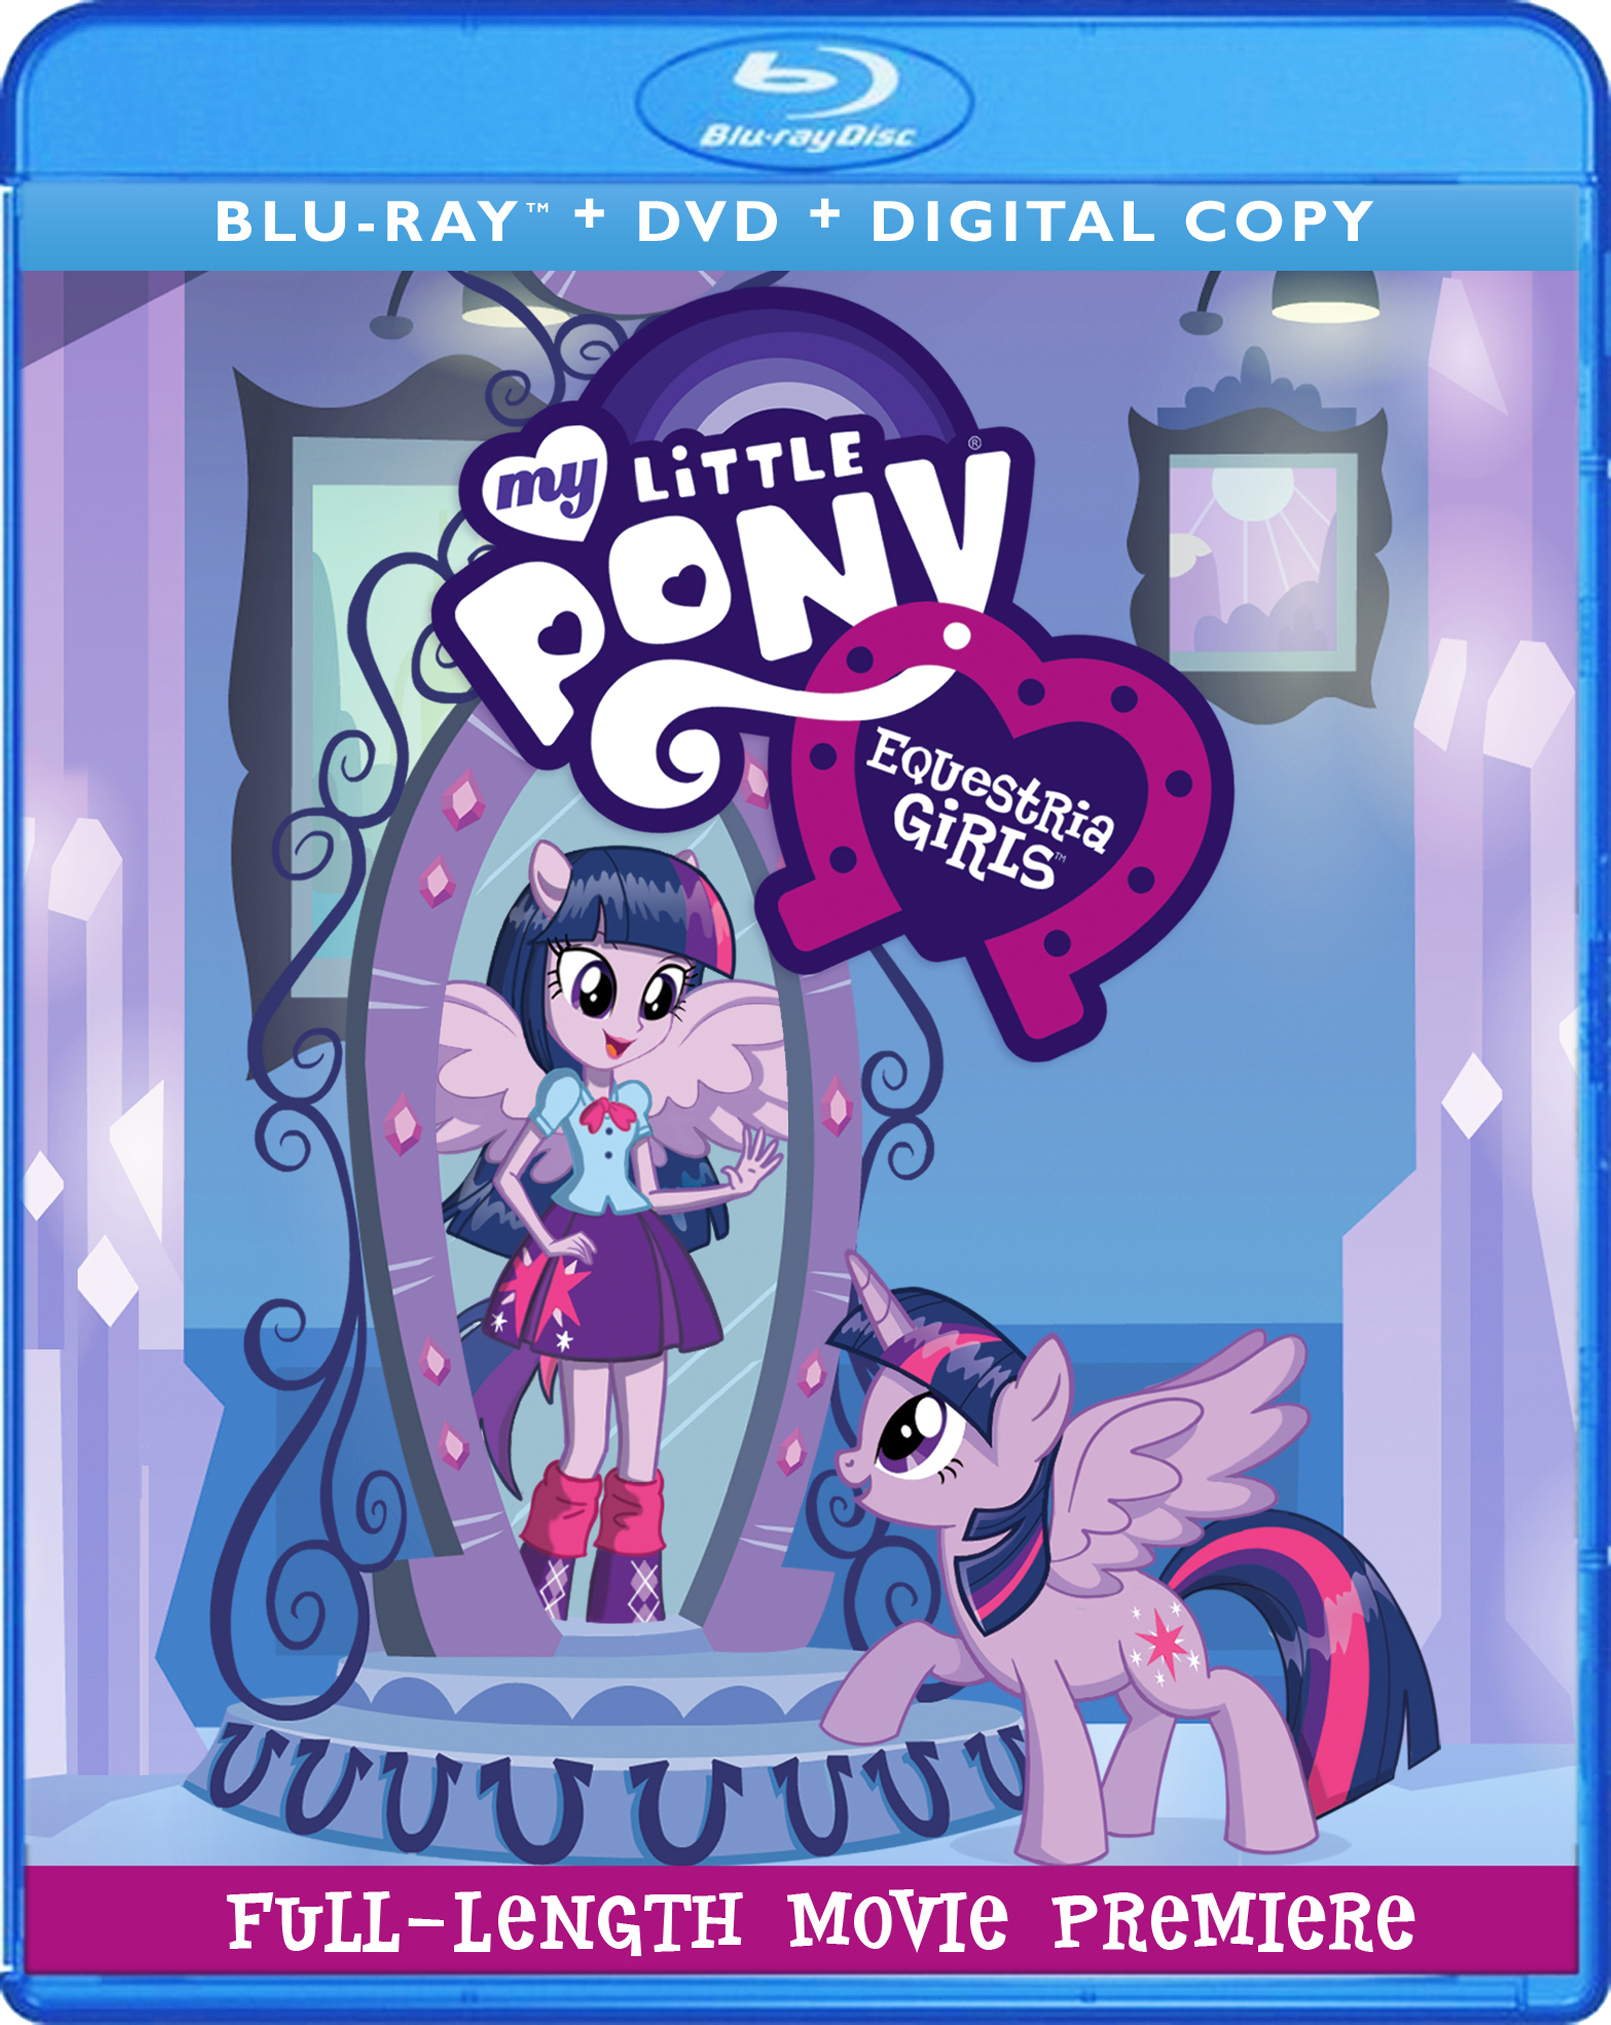 My Little Pony Equestria Girls Bluray Review